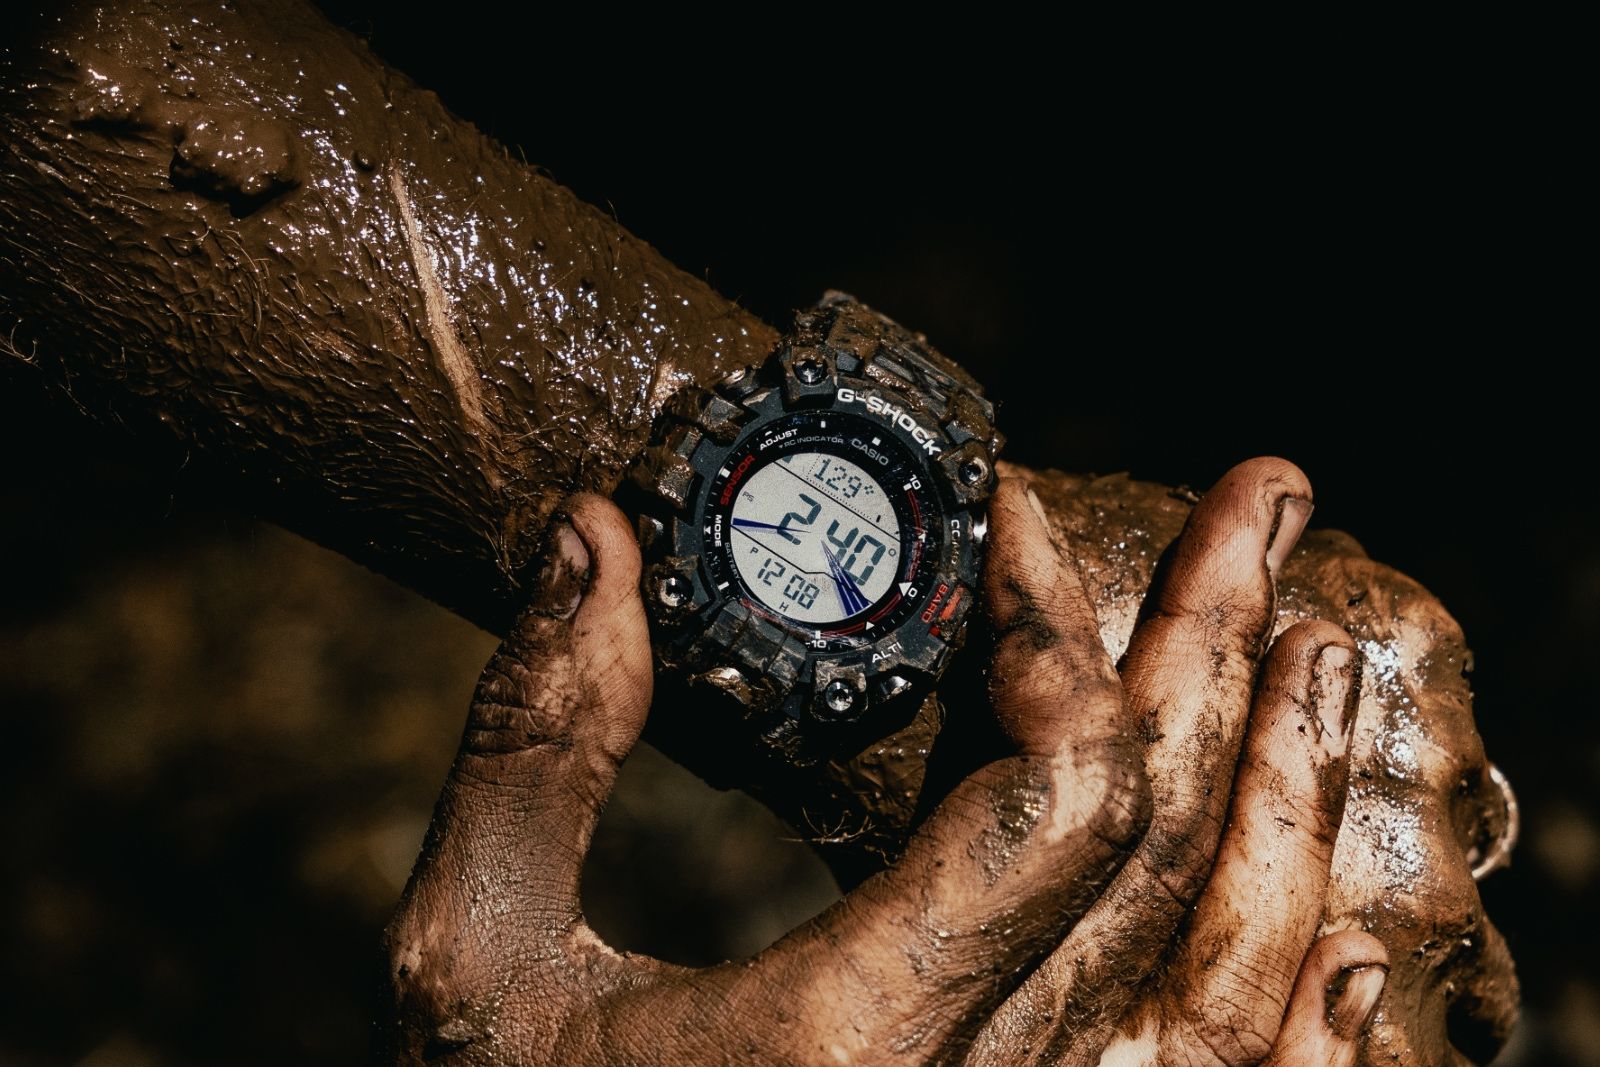 The new G-Shock Mudman can take a beating